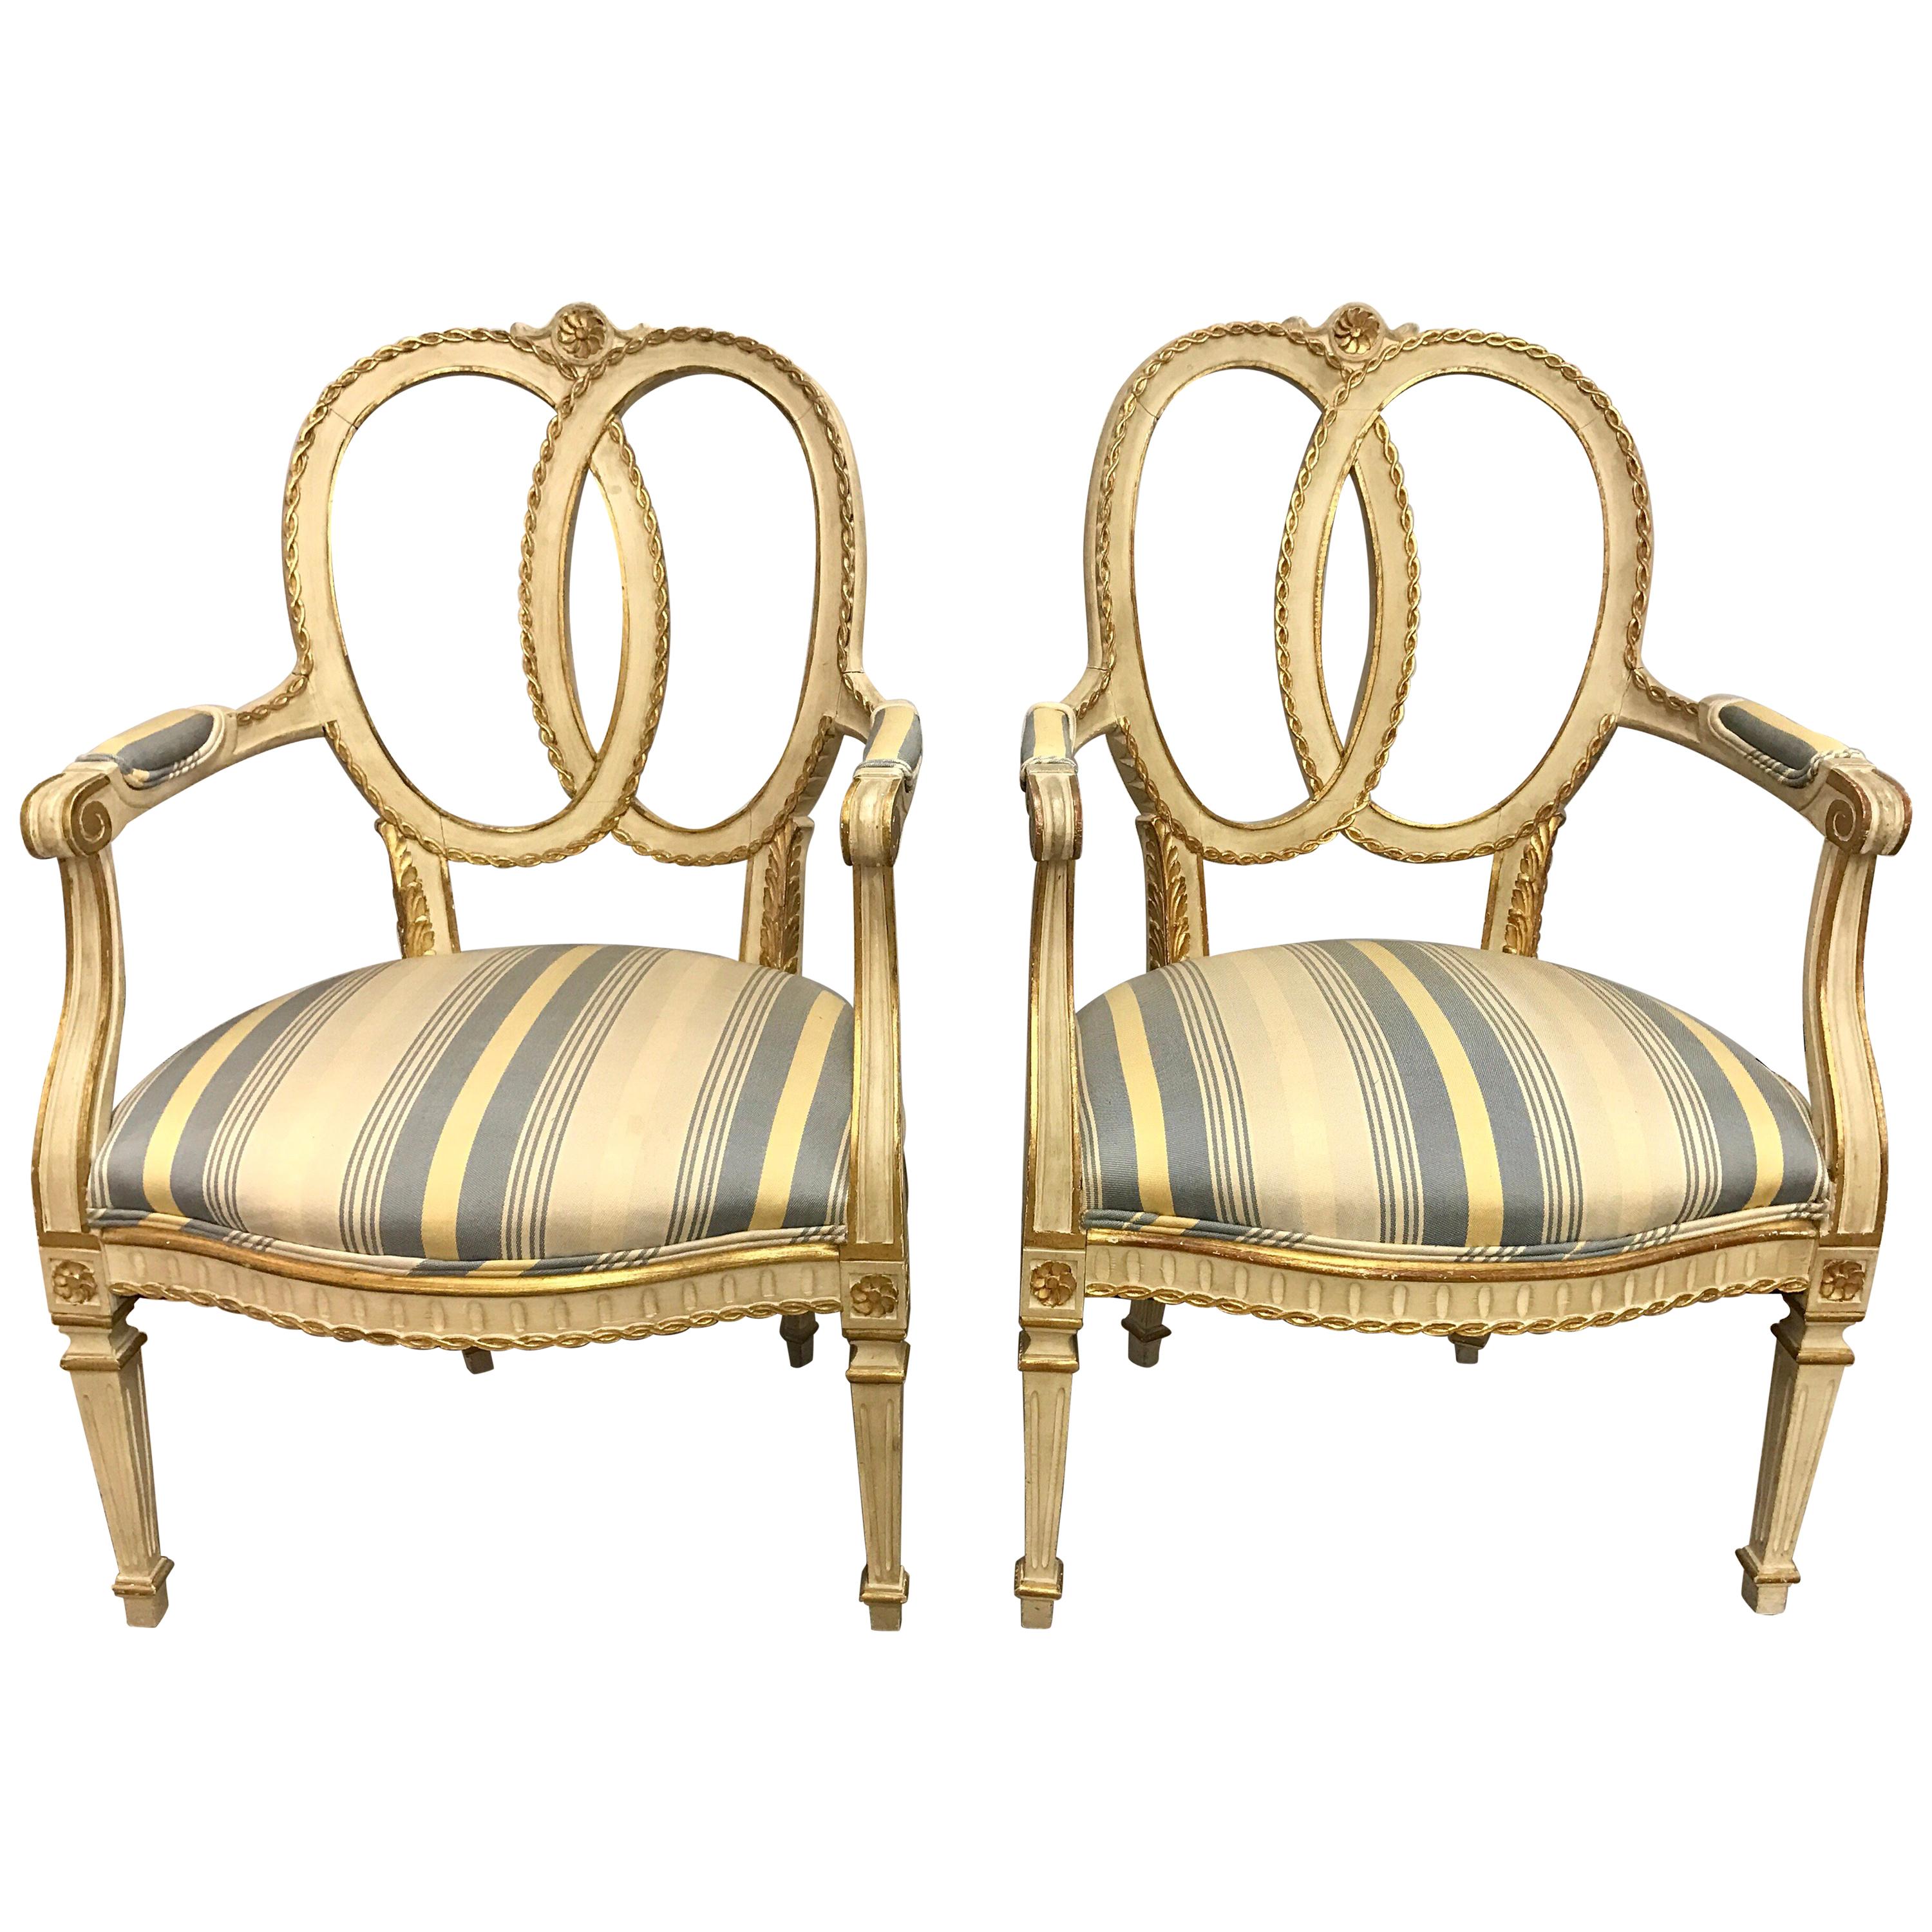 Pair of Antique French Cream Painted Giltwood Armchairs